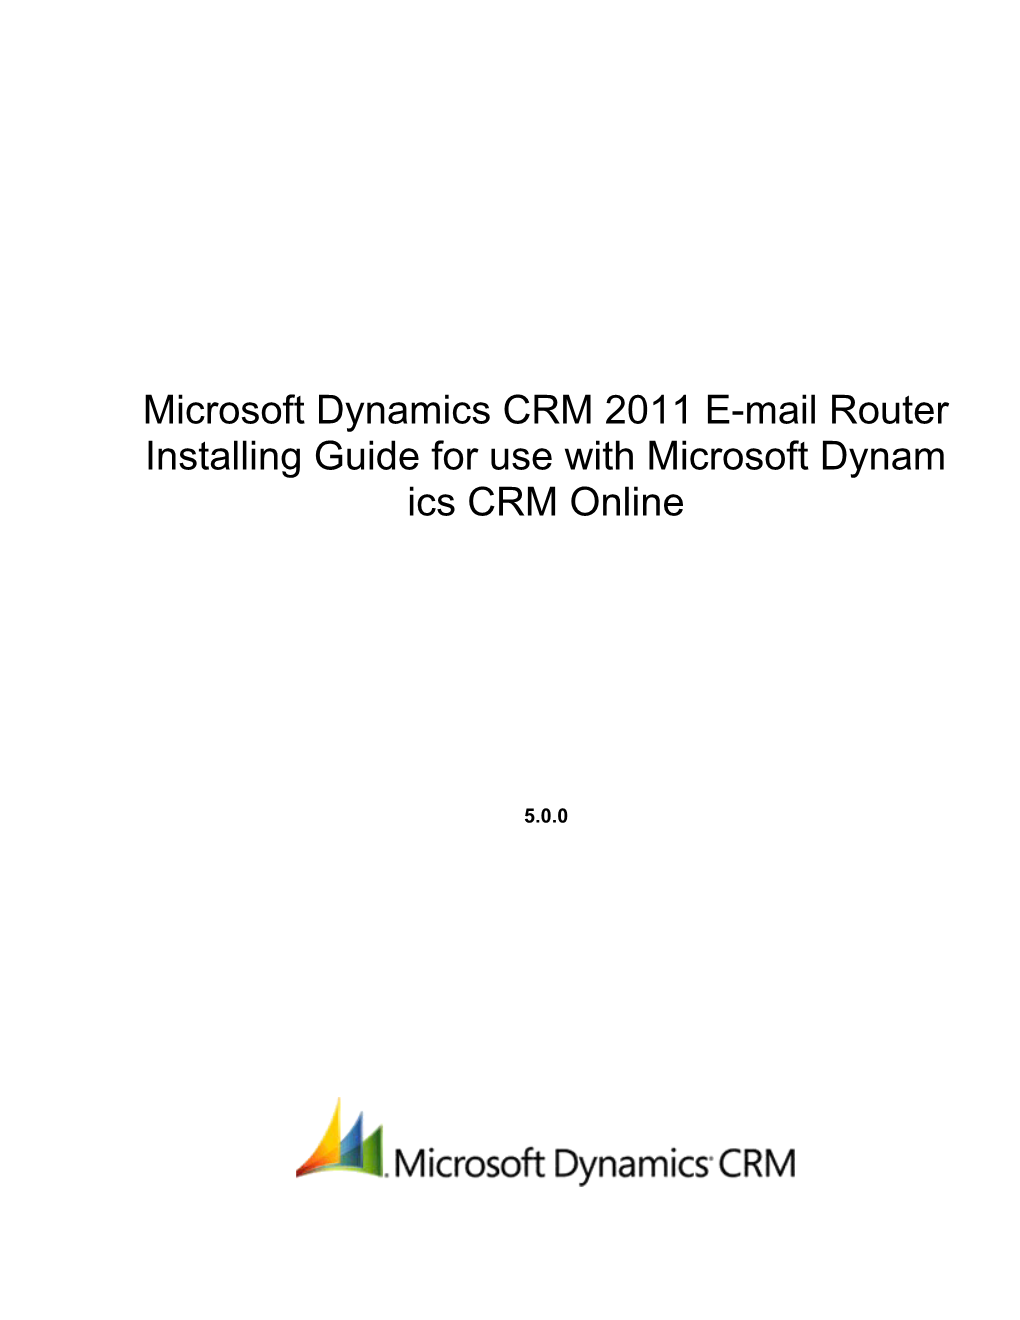 Microsoft Dynamics CRM 2011 E-Mail Router Installing Guide for Use with Microsoft Dynamics